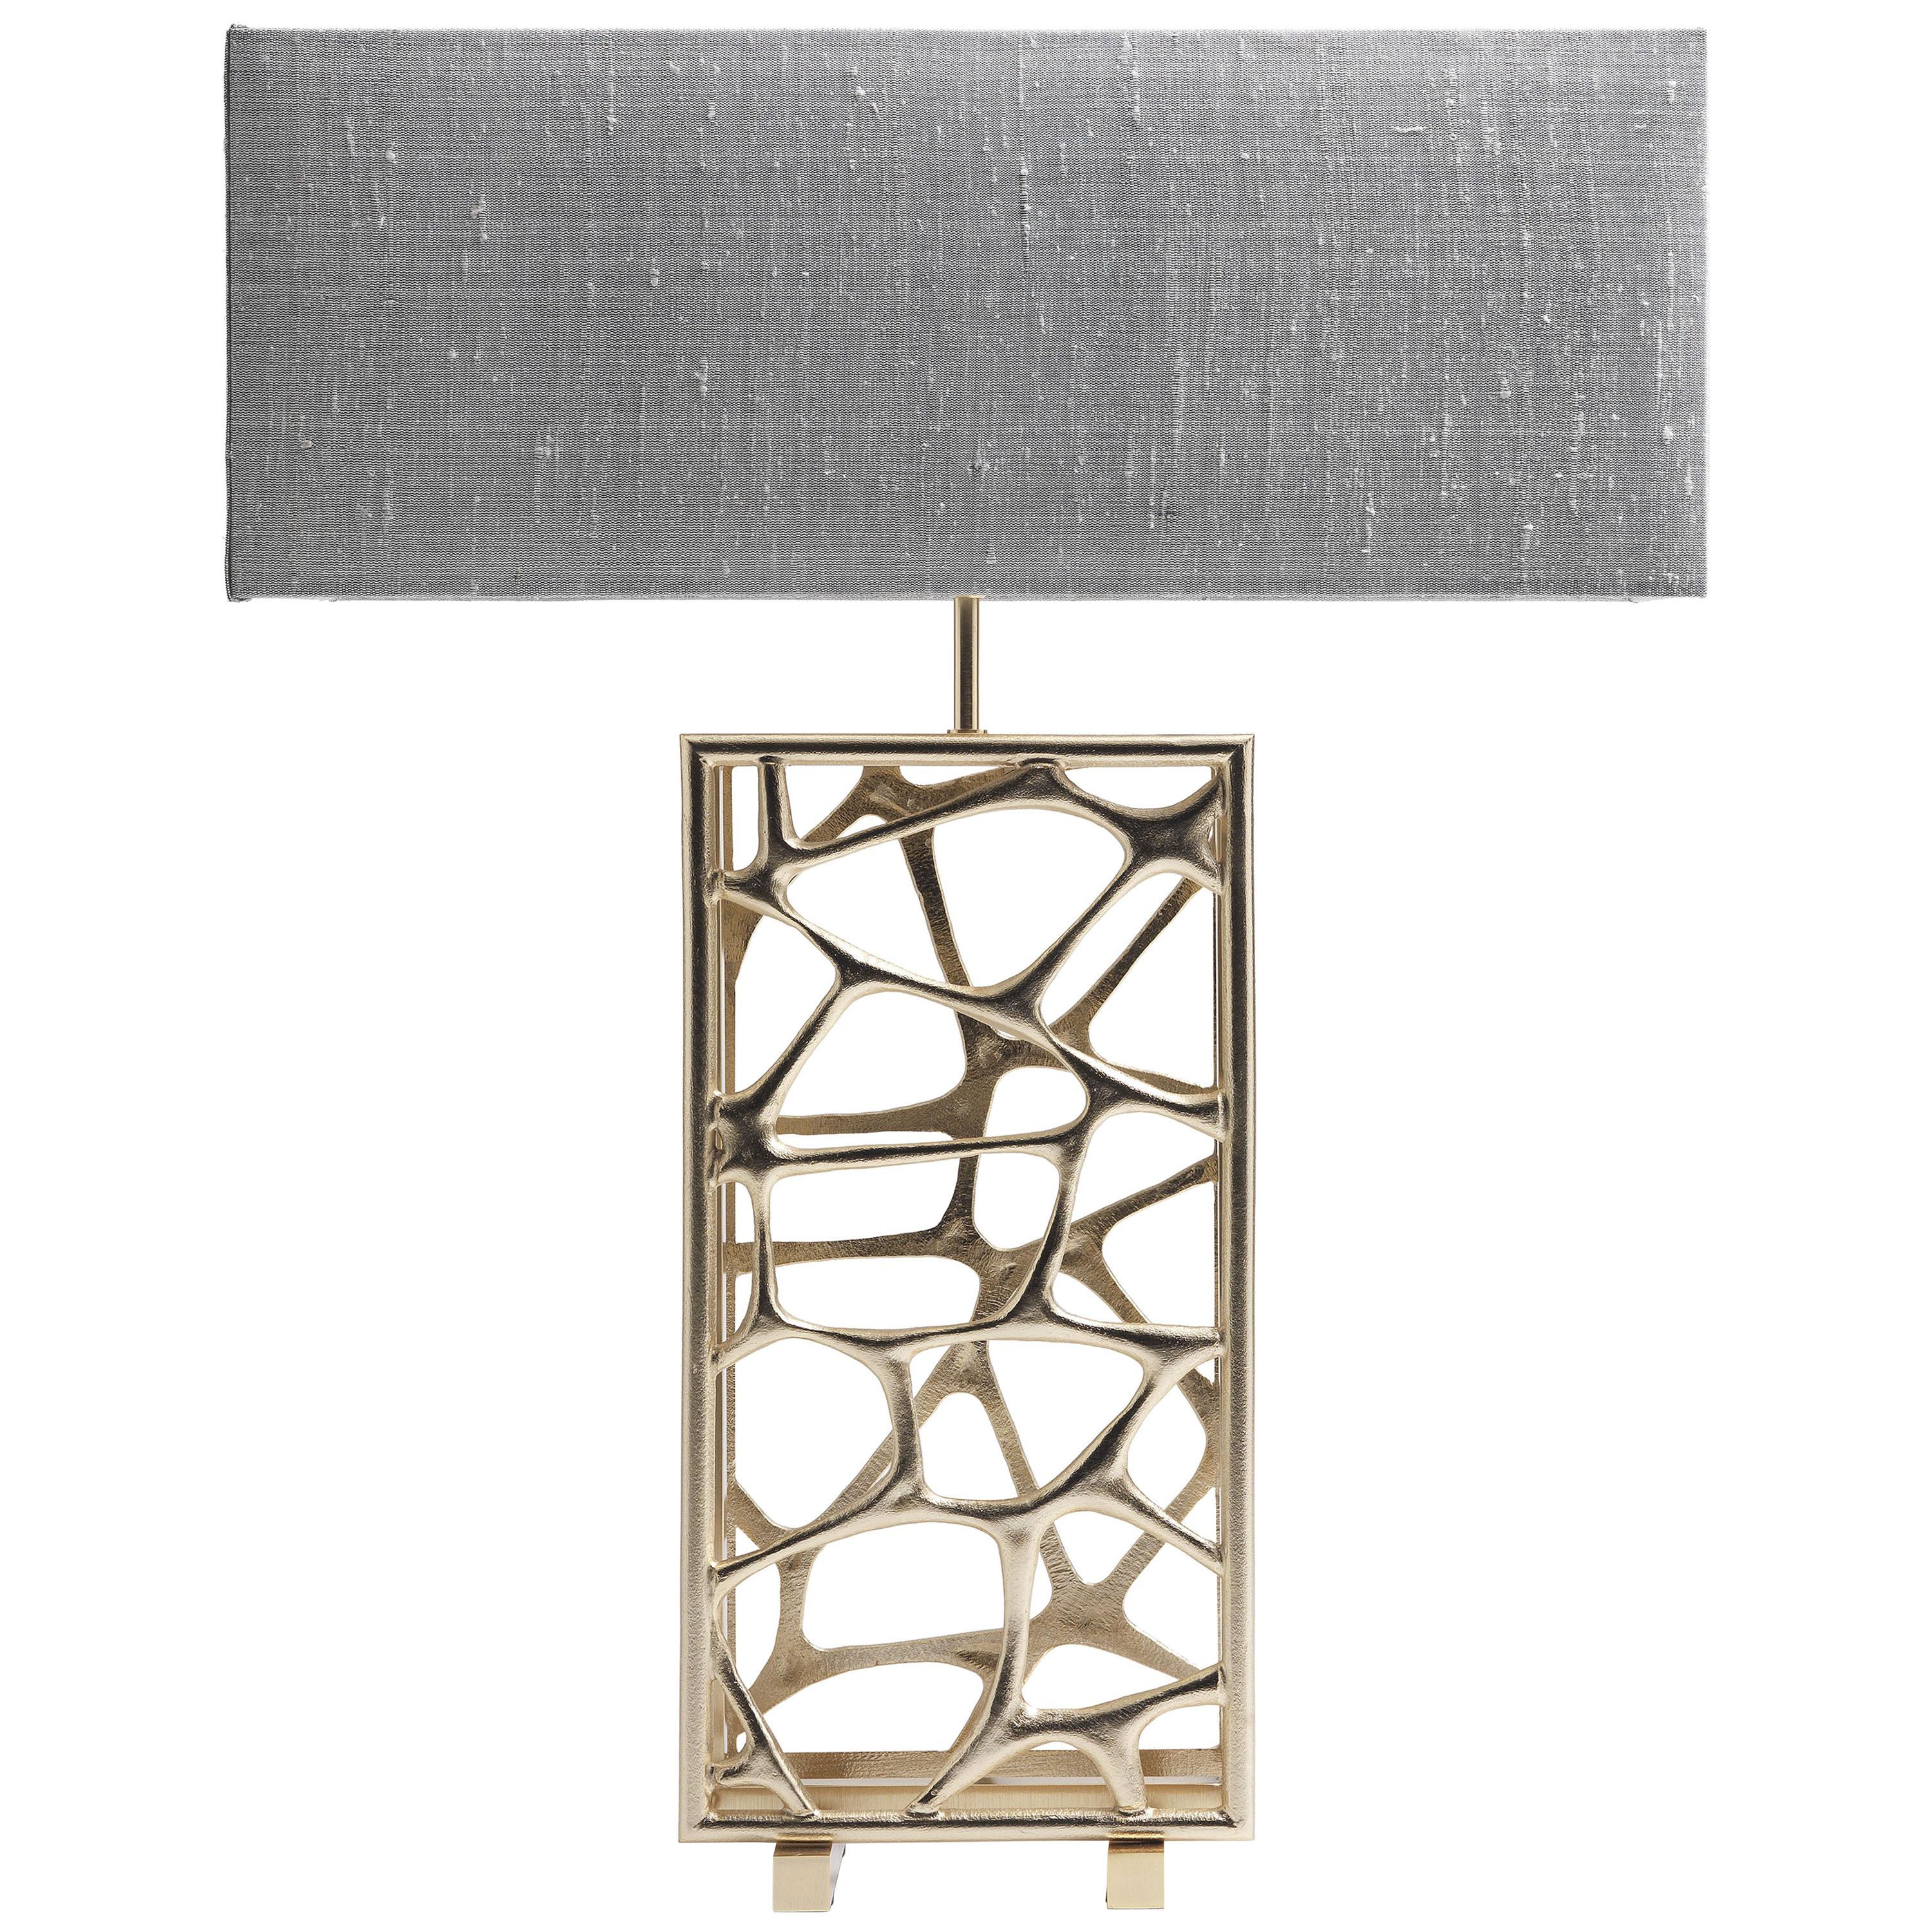 21st Century Sioraf.4 Table Lamp in Brass by Roberto Cavalli Home Interiors  For Sale